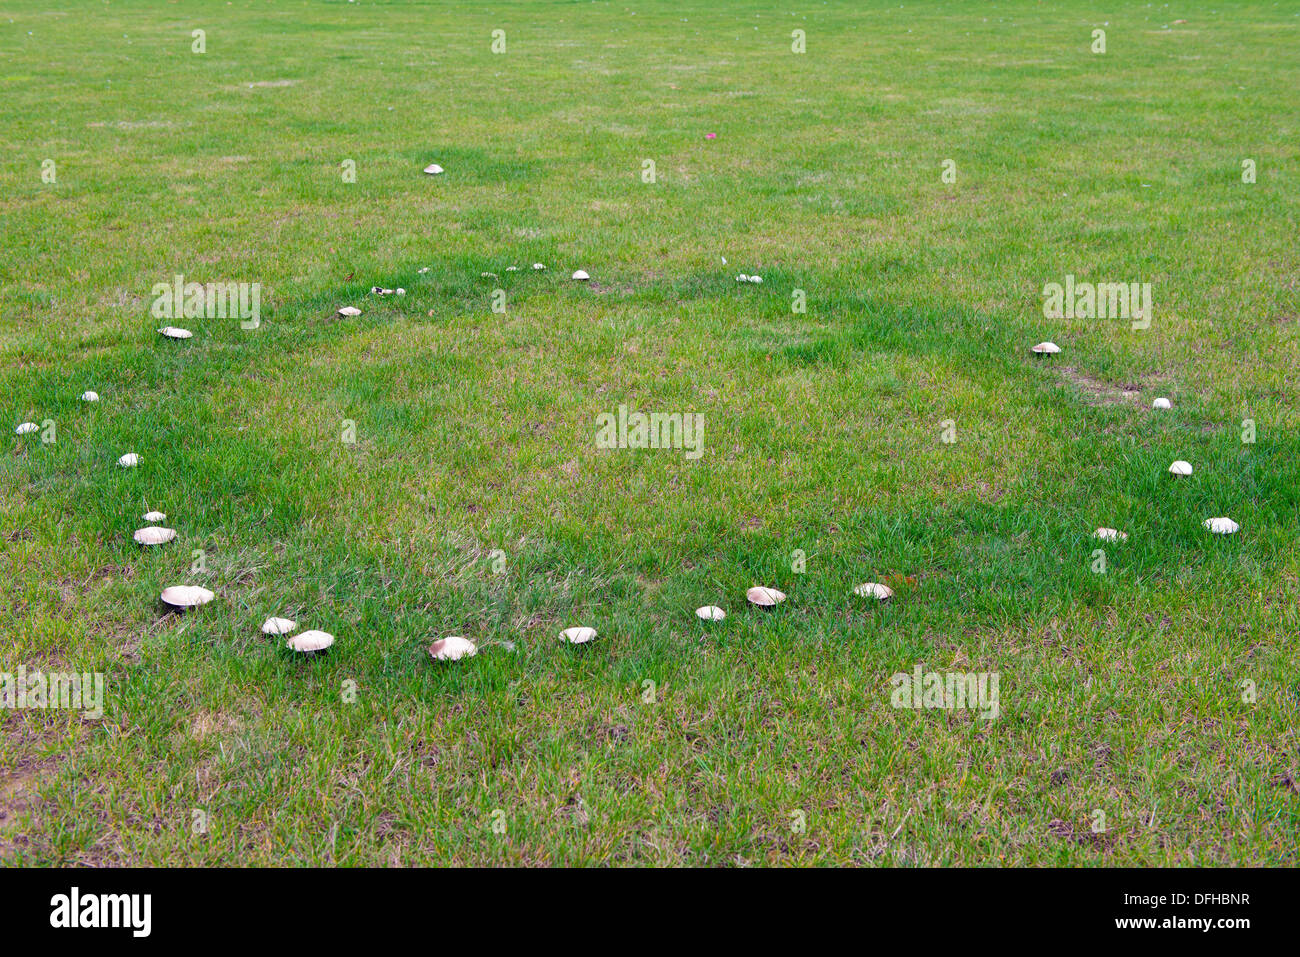 Fairy circle of unknown Fungi on a large Lawn. Stock Photo